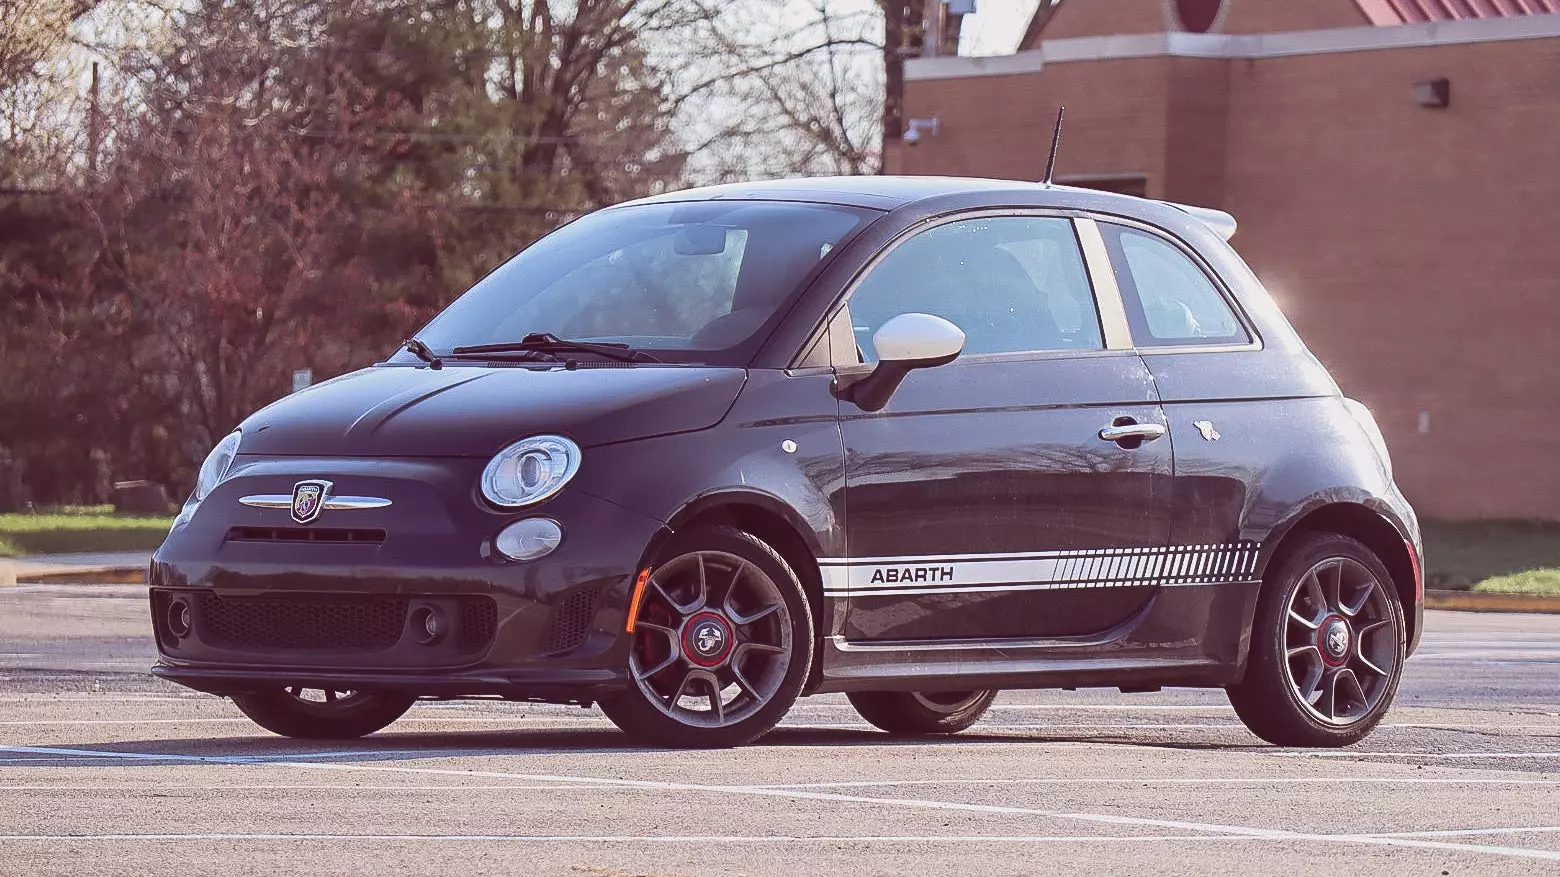 Lots of Research Really Paid Off While Fixing My $1,500 Fiat Abarth’s Broken Axles